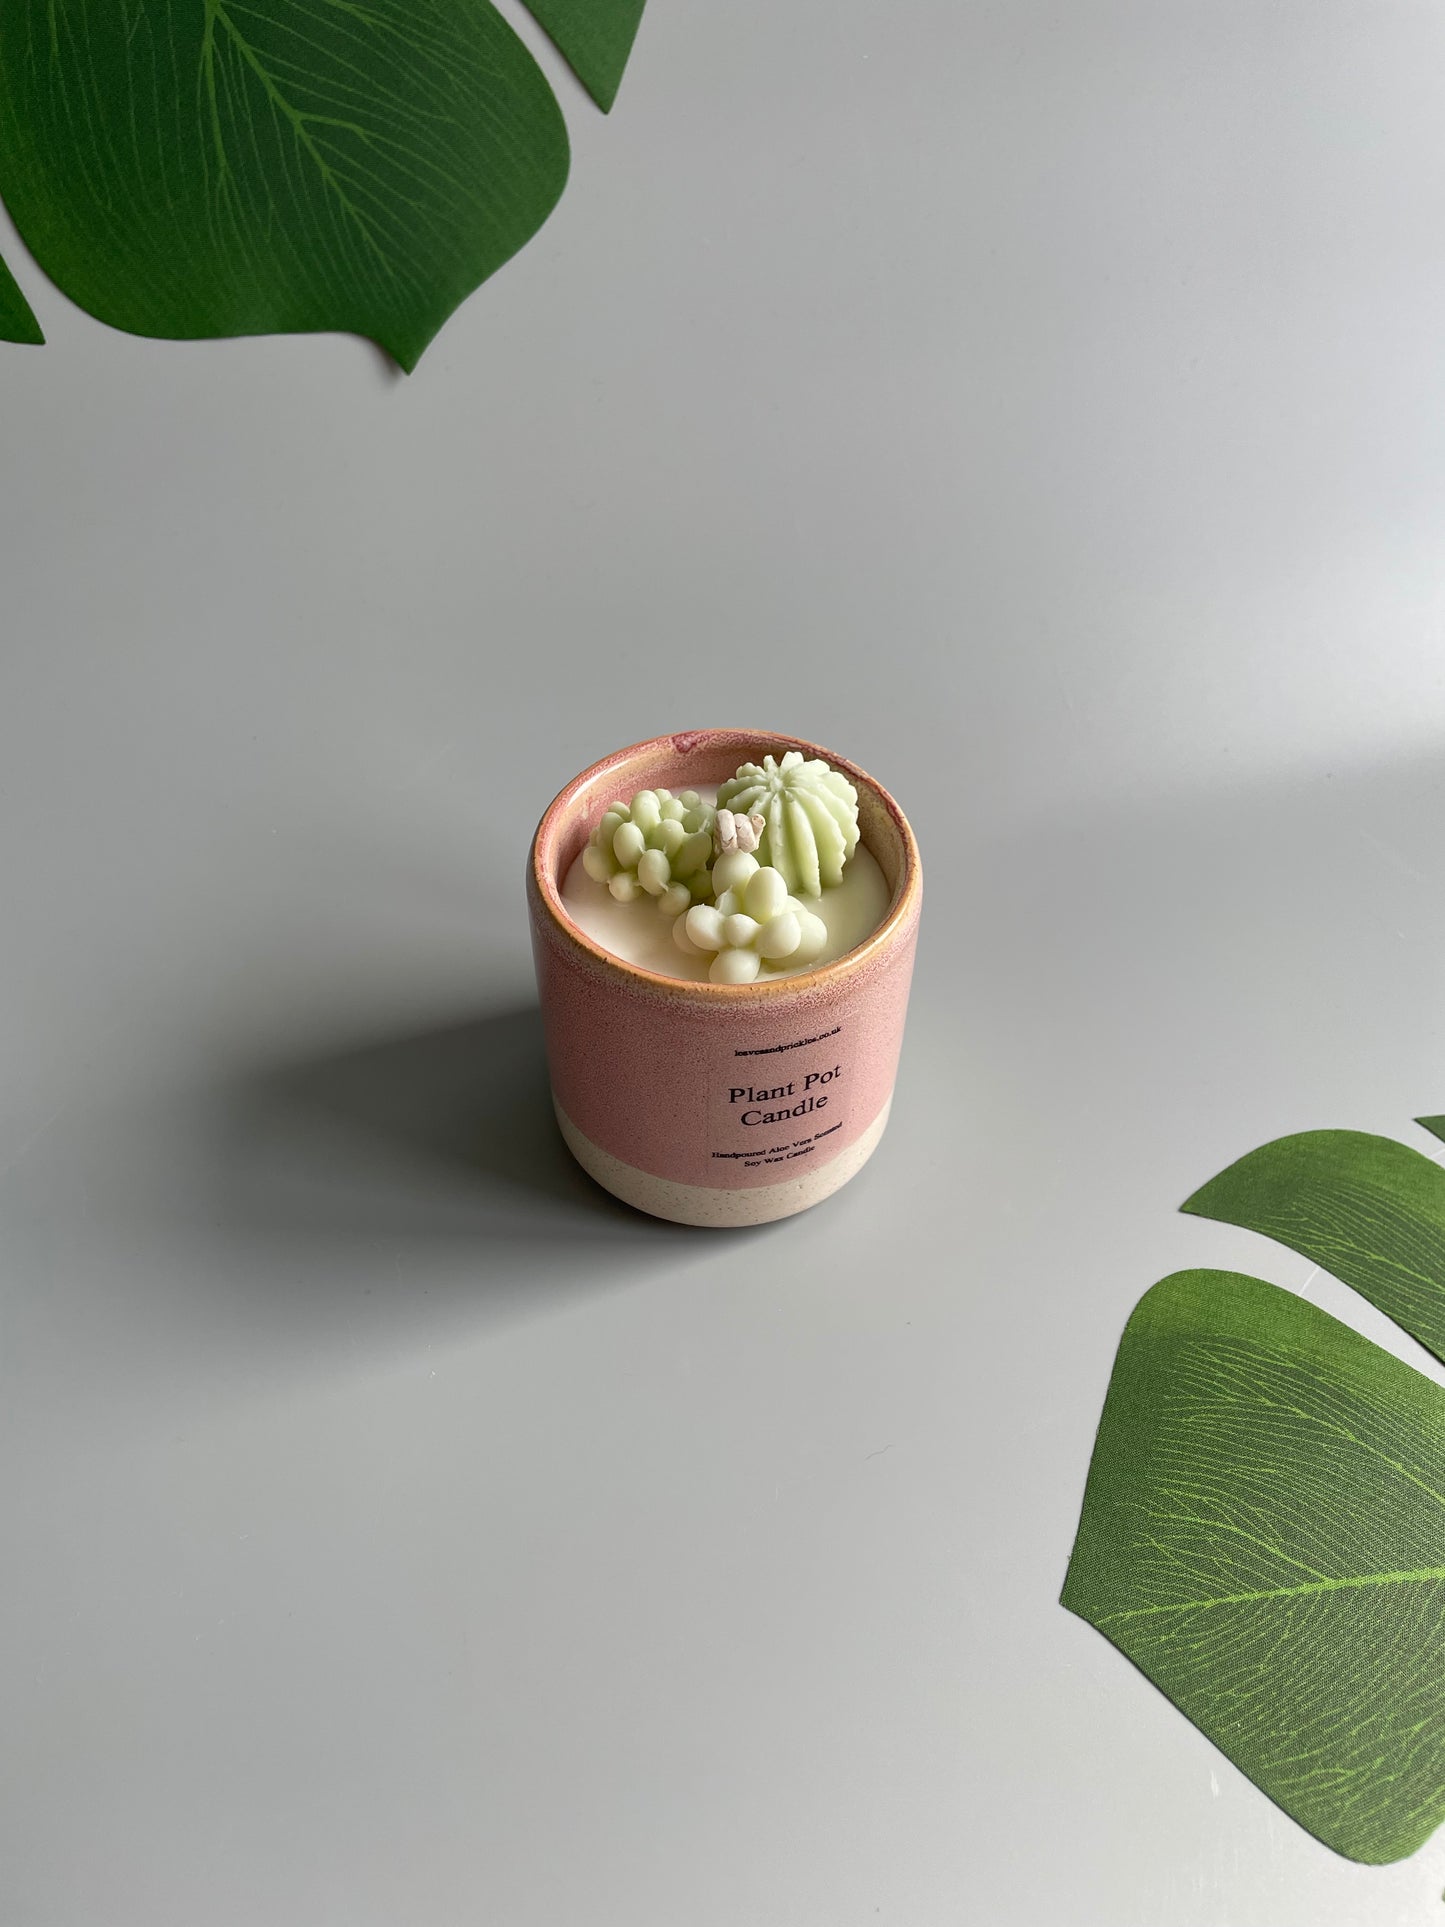 Pink Ceramic Plan Pot Candle (all green succulents)